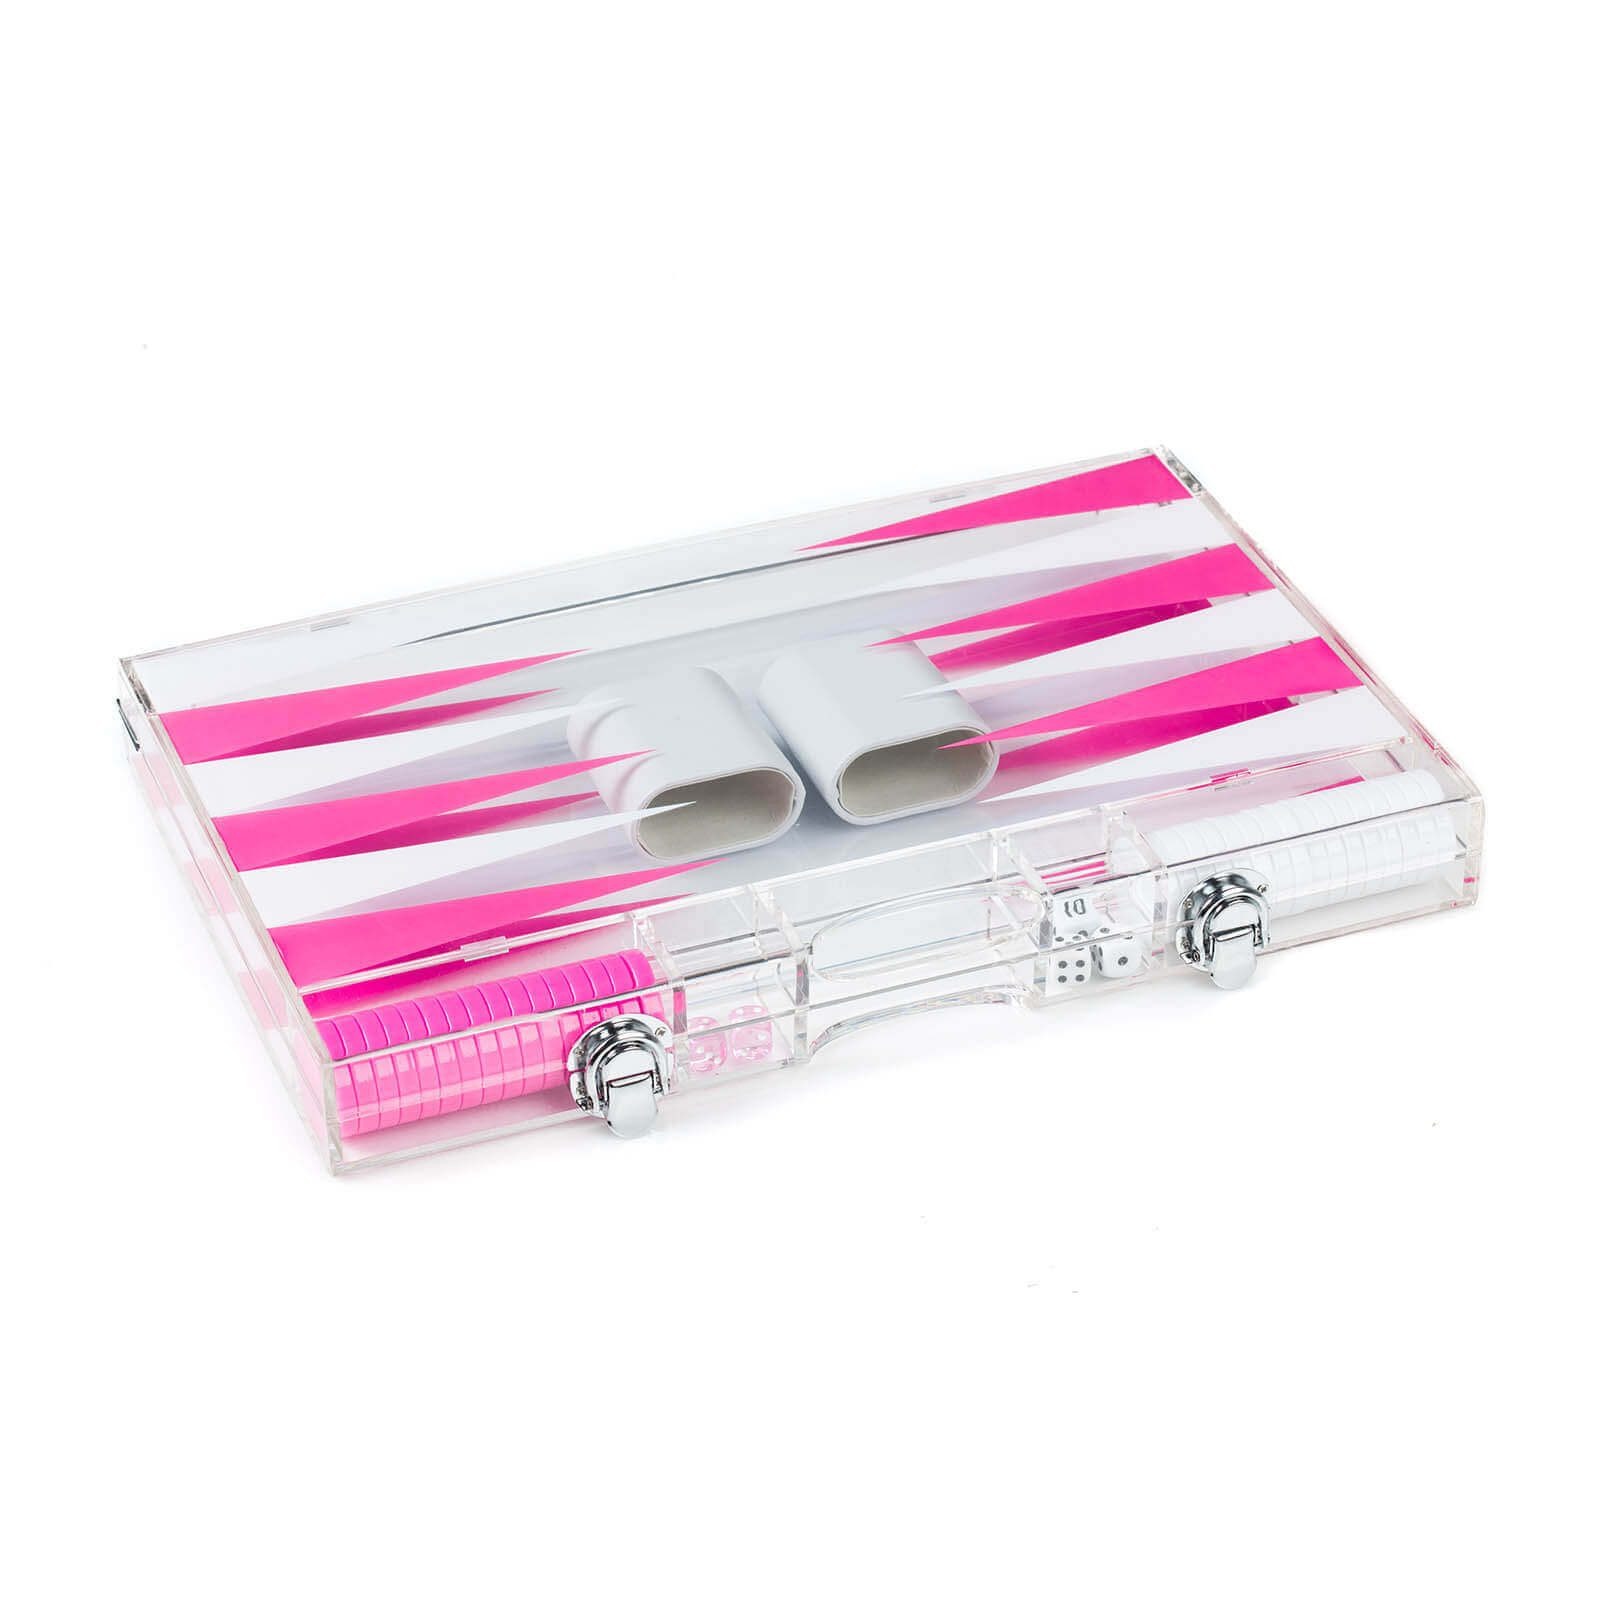 Acrylic Backgammon Set in Pink and White Closed